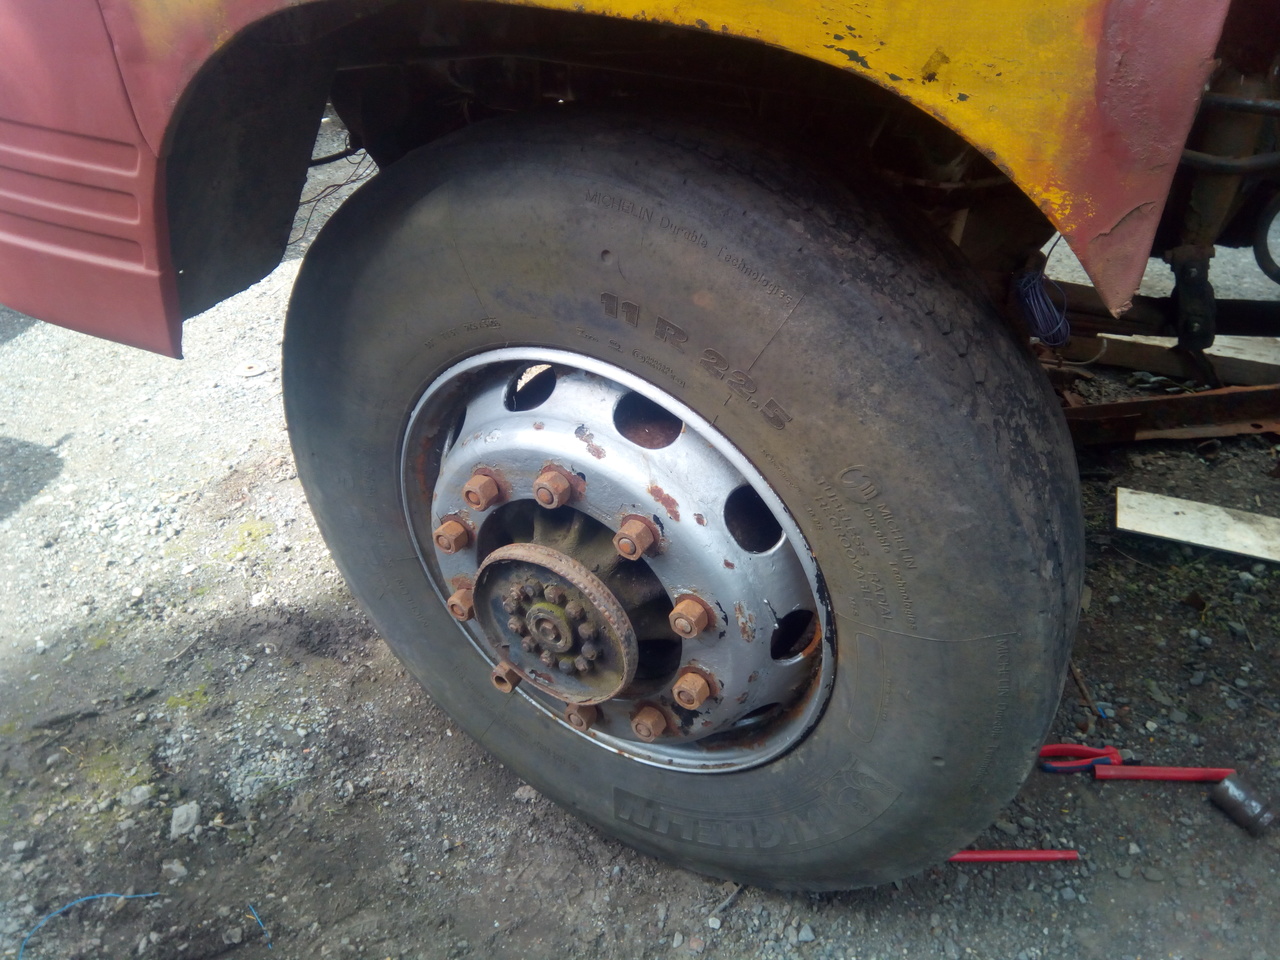 A flakey silver modern truck wheel partially bolted up to the
Bedford's front axle.